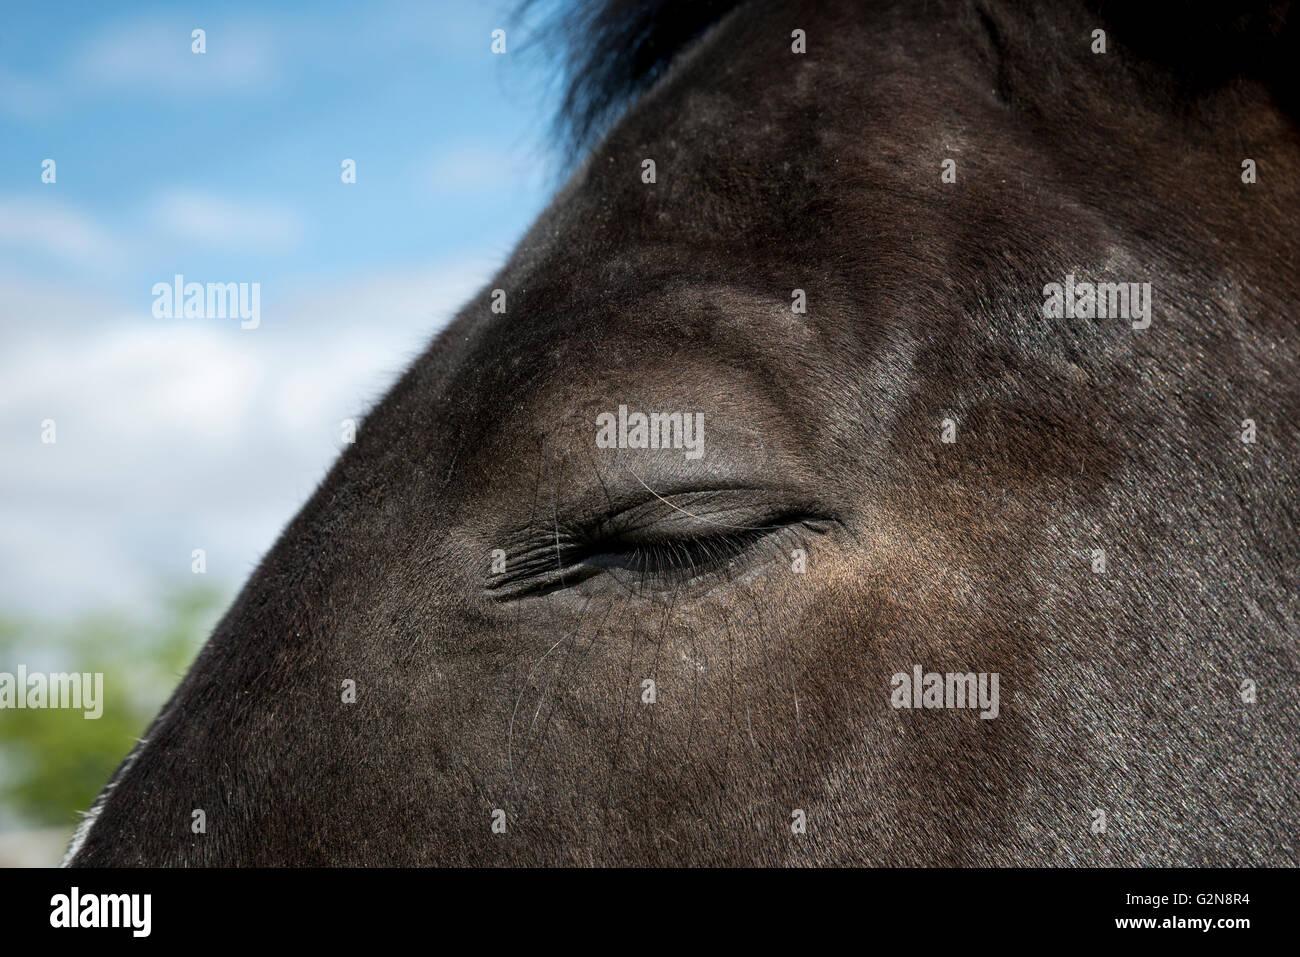 Close up of a dark coloured horse with its eye closed in the summer sunshine. Stock Photo